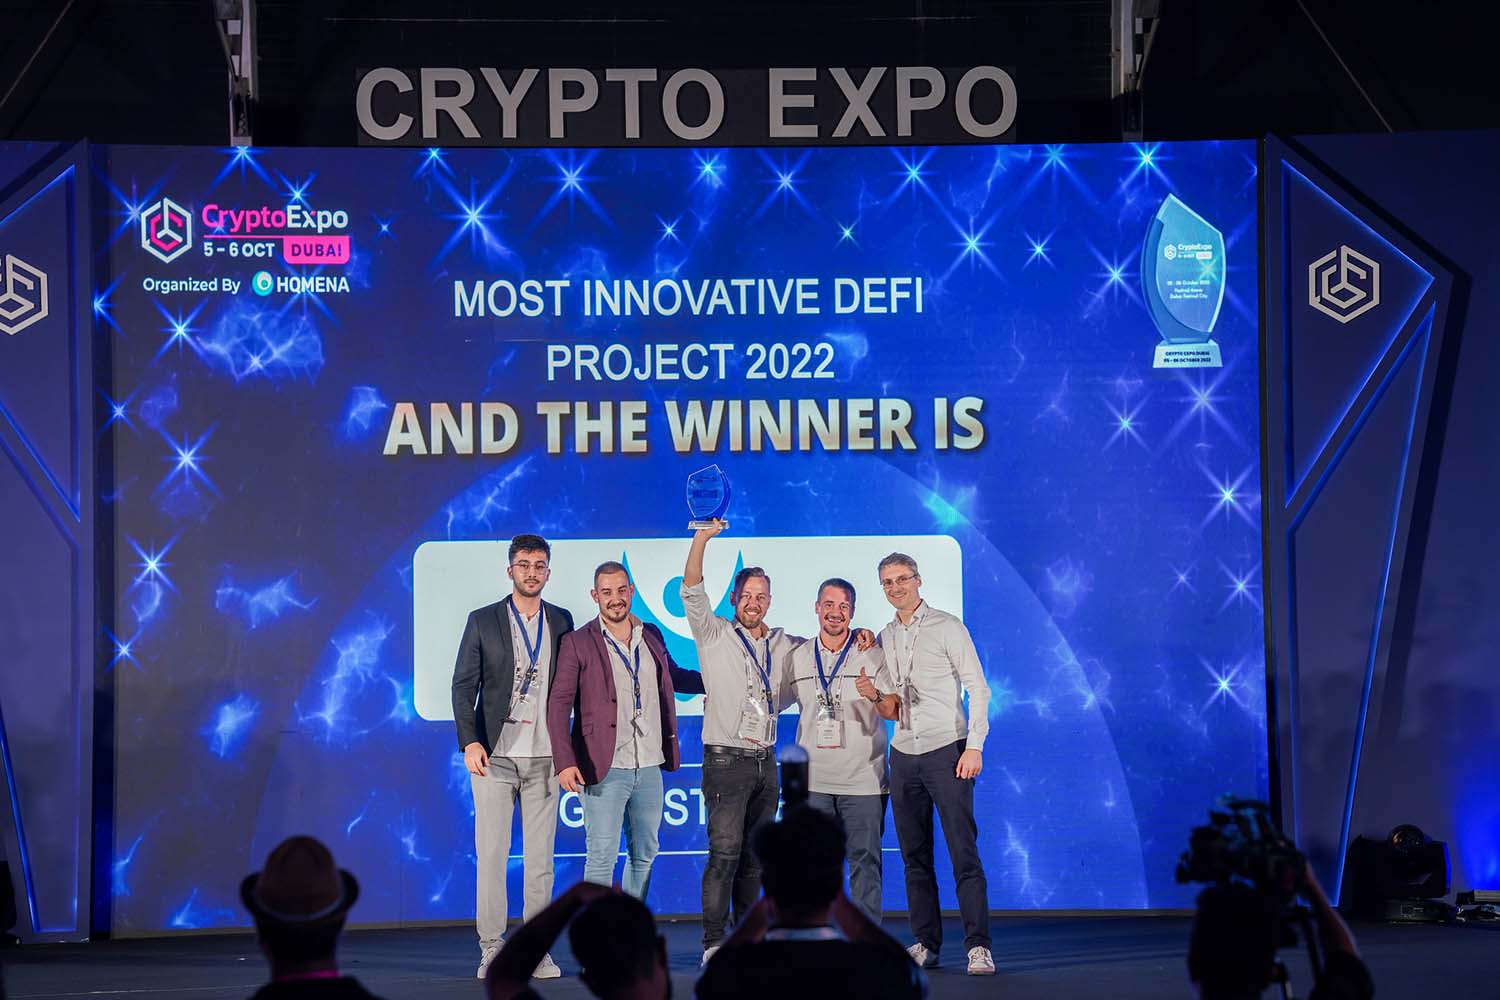 The most innovative DEFI project of 2022 award